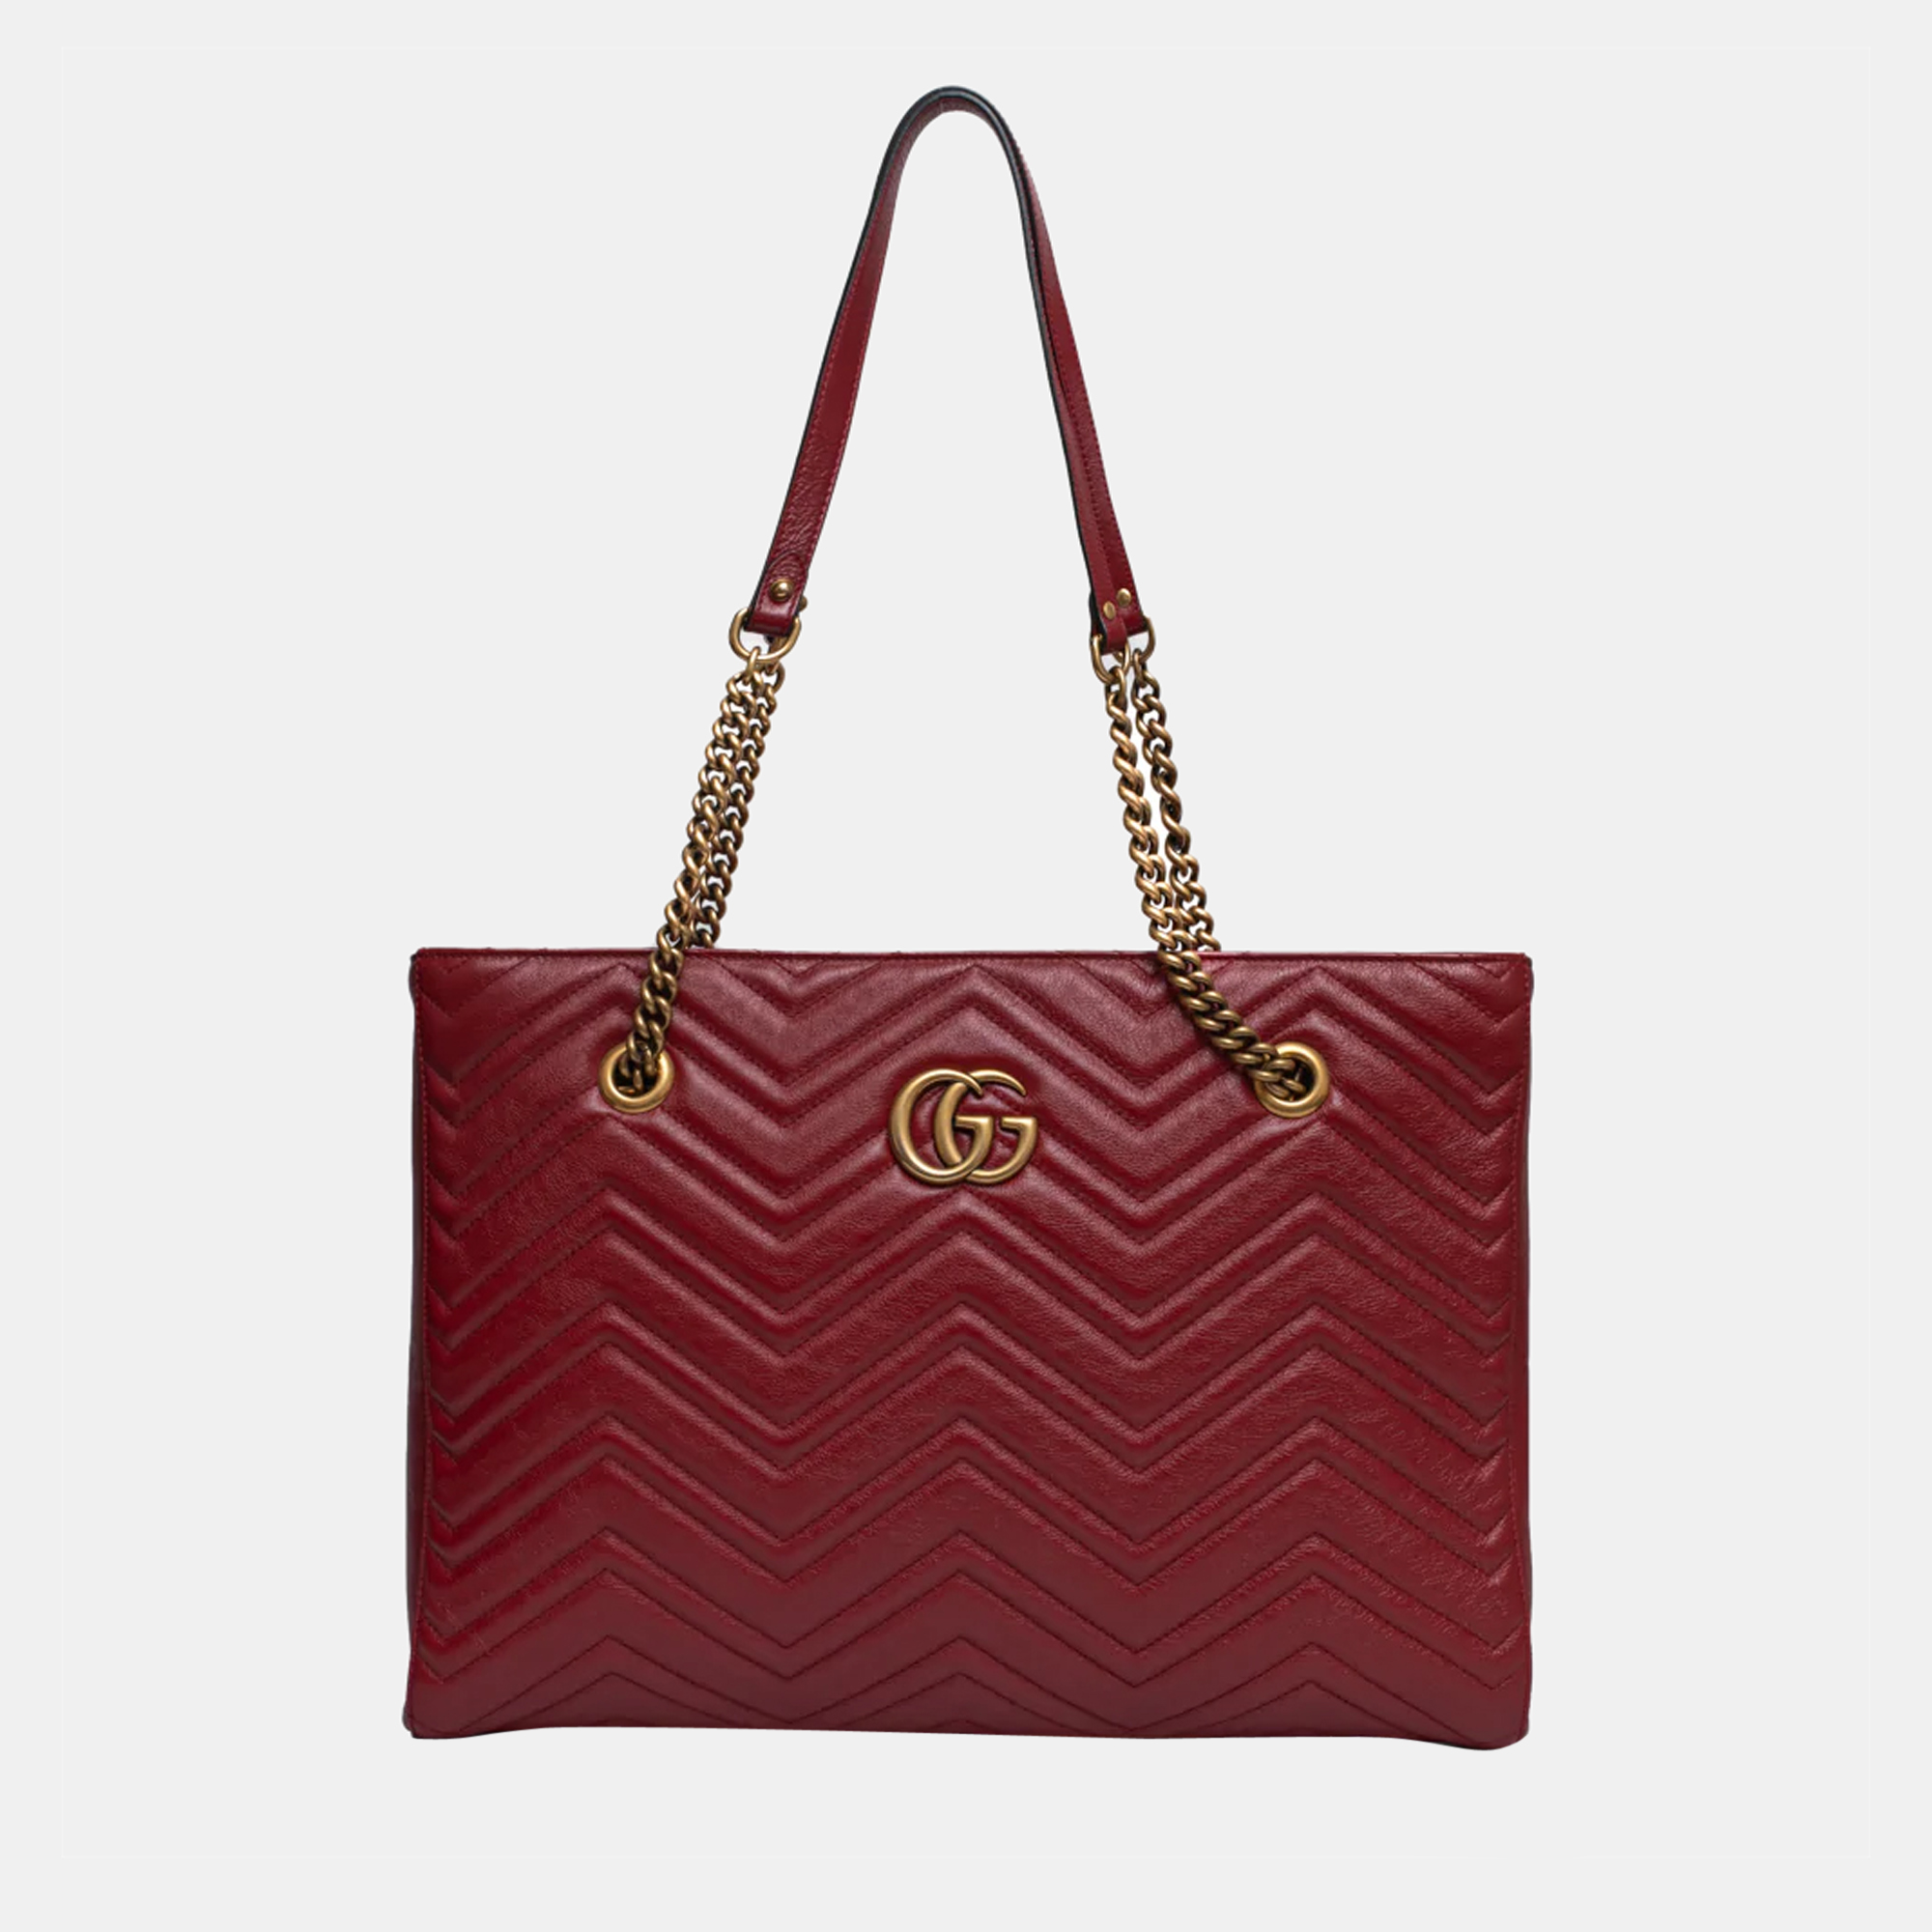 Gucci Tote Shoulder Bag In Red Leather